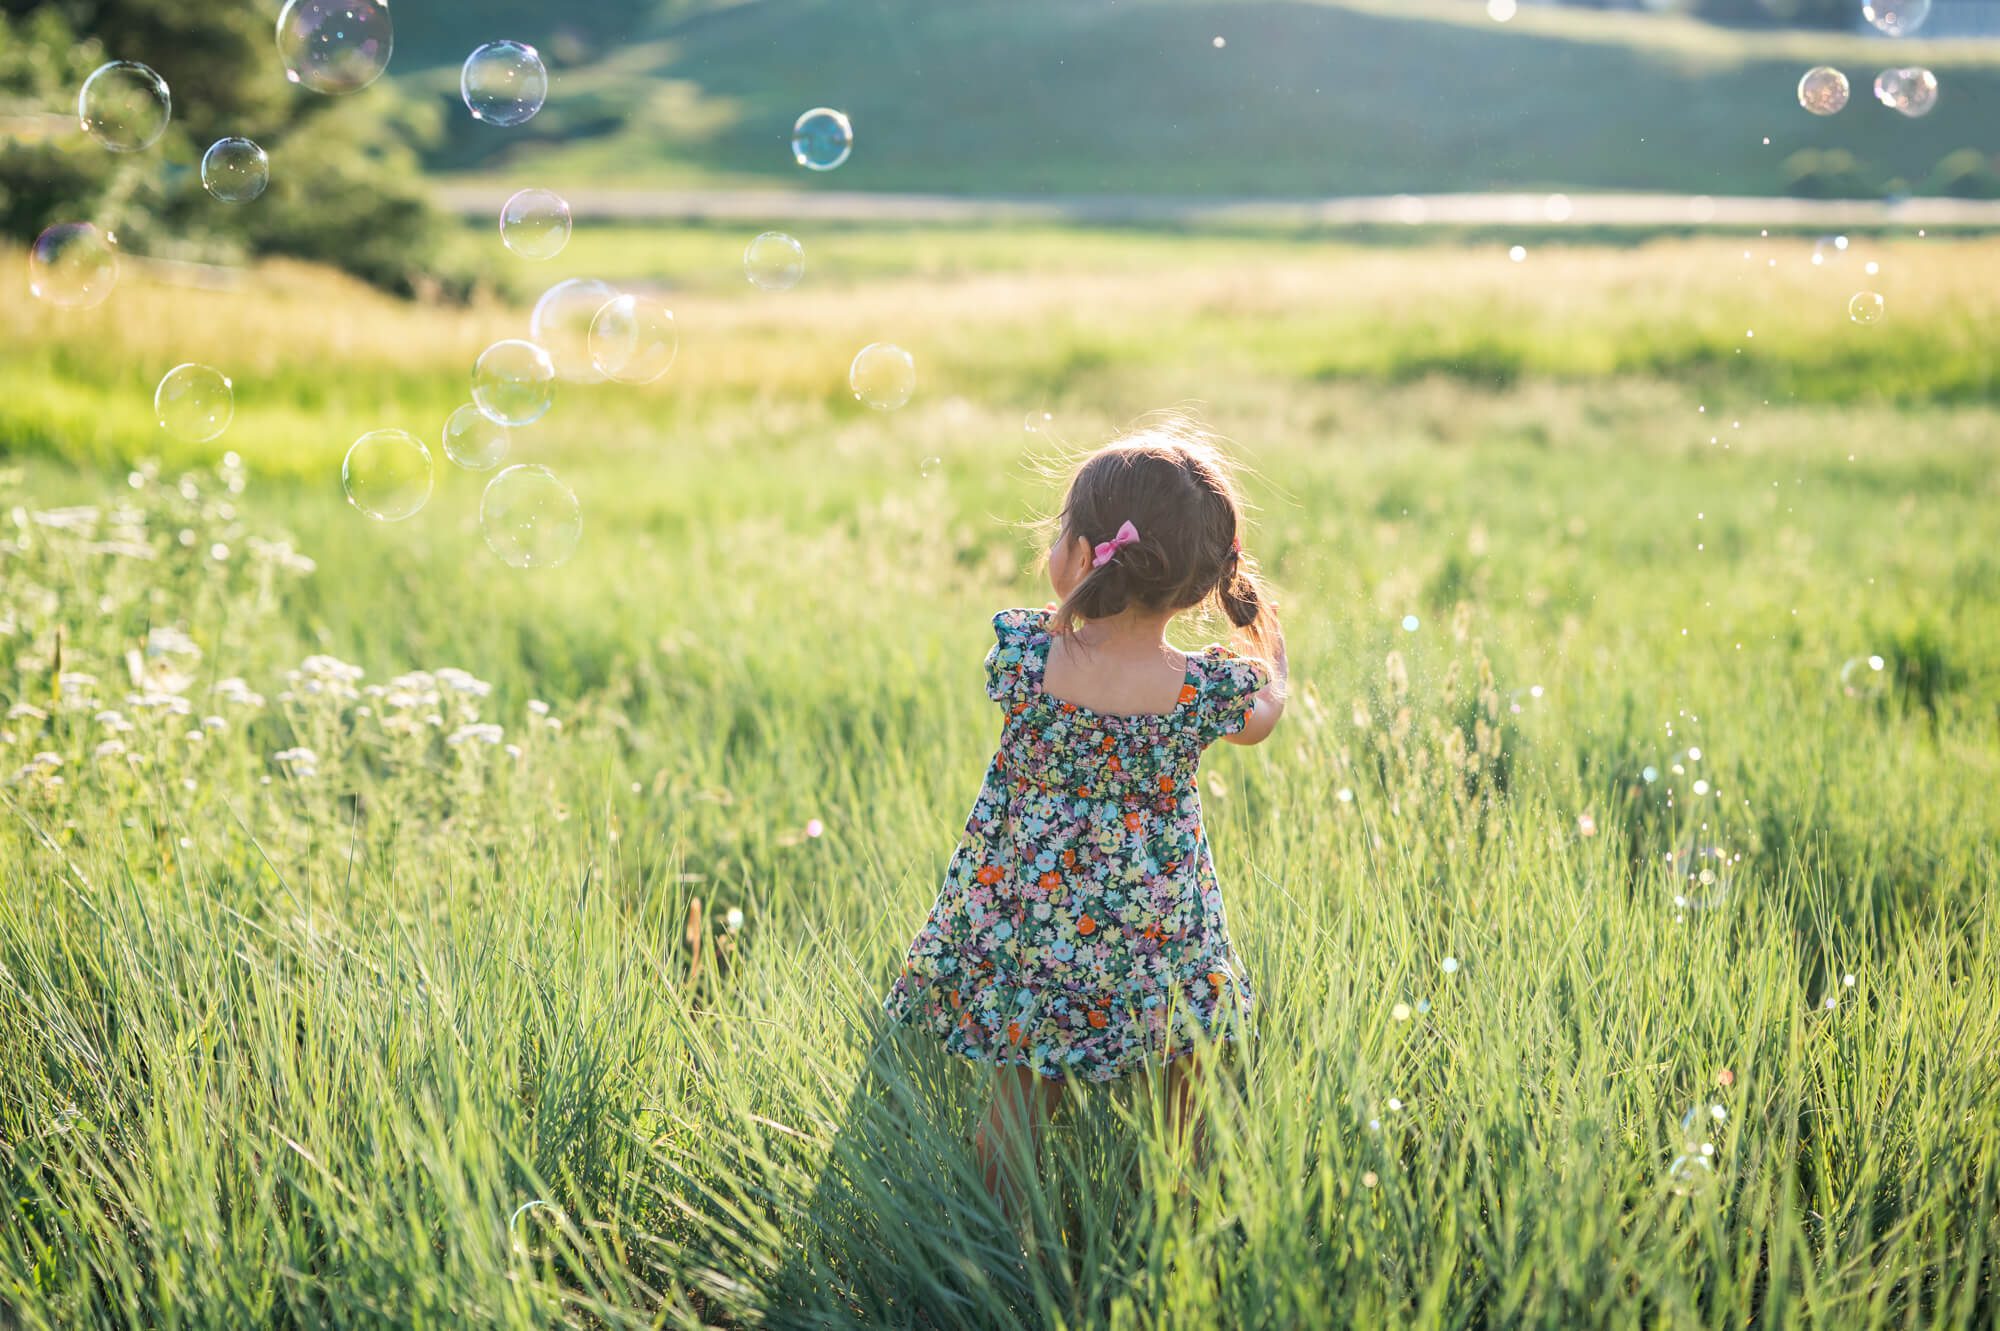 child playing in a grass field with bubbles